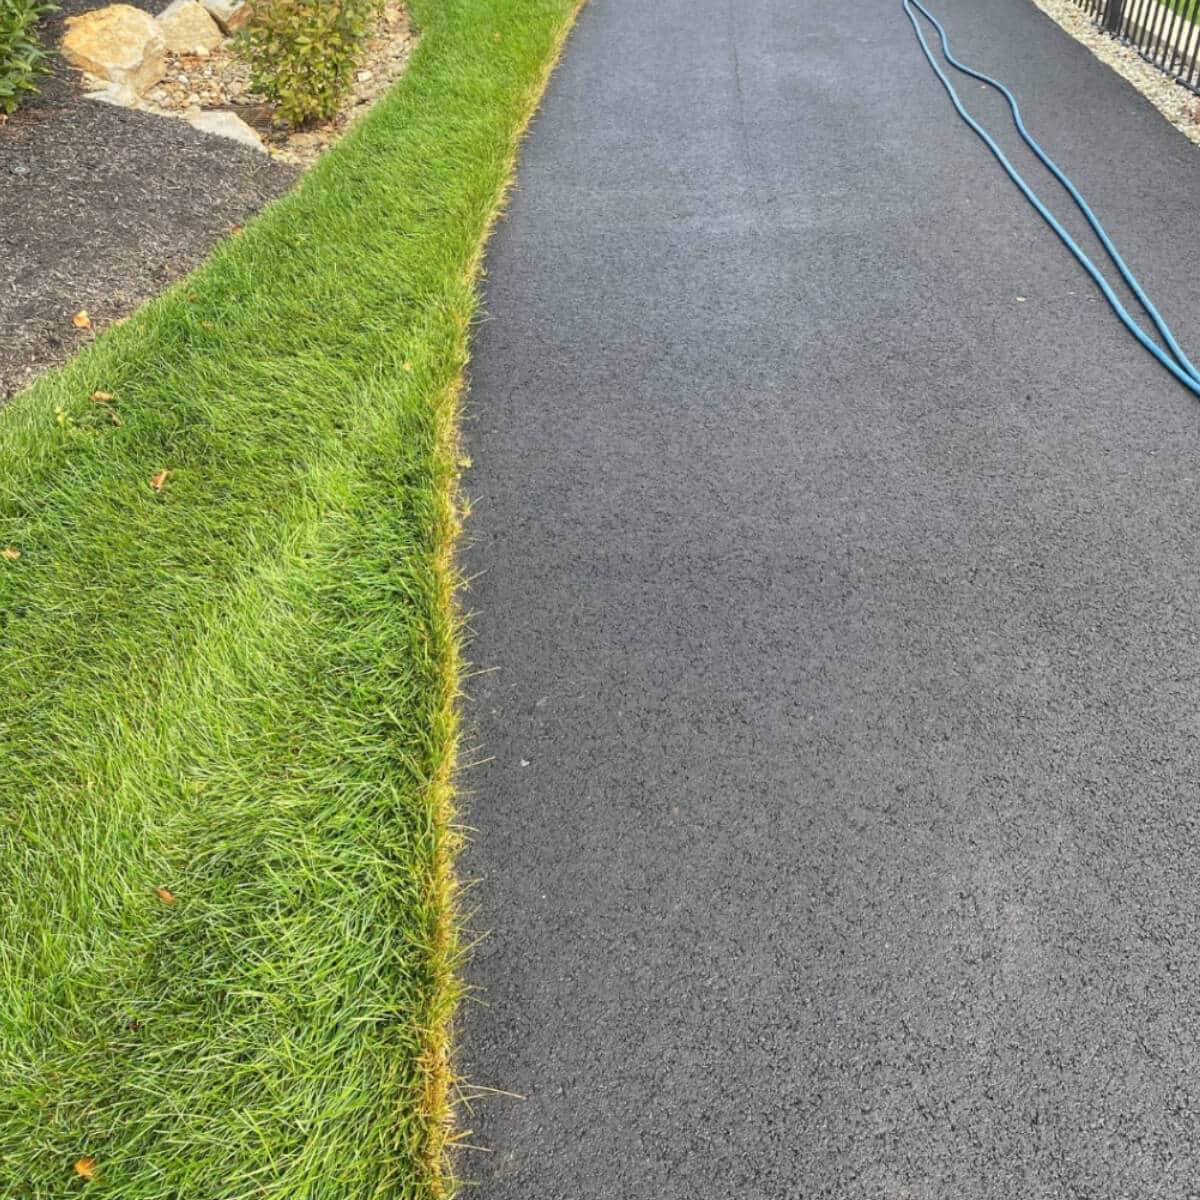 clean outdoor driveway after pressure washing service in allentown pa